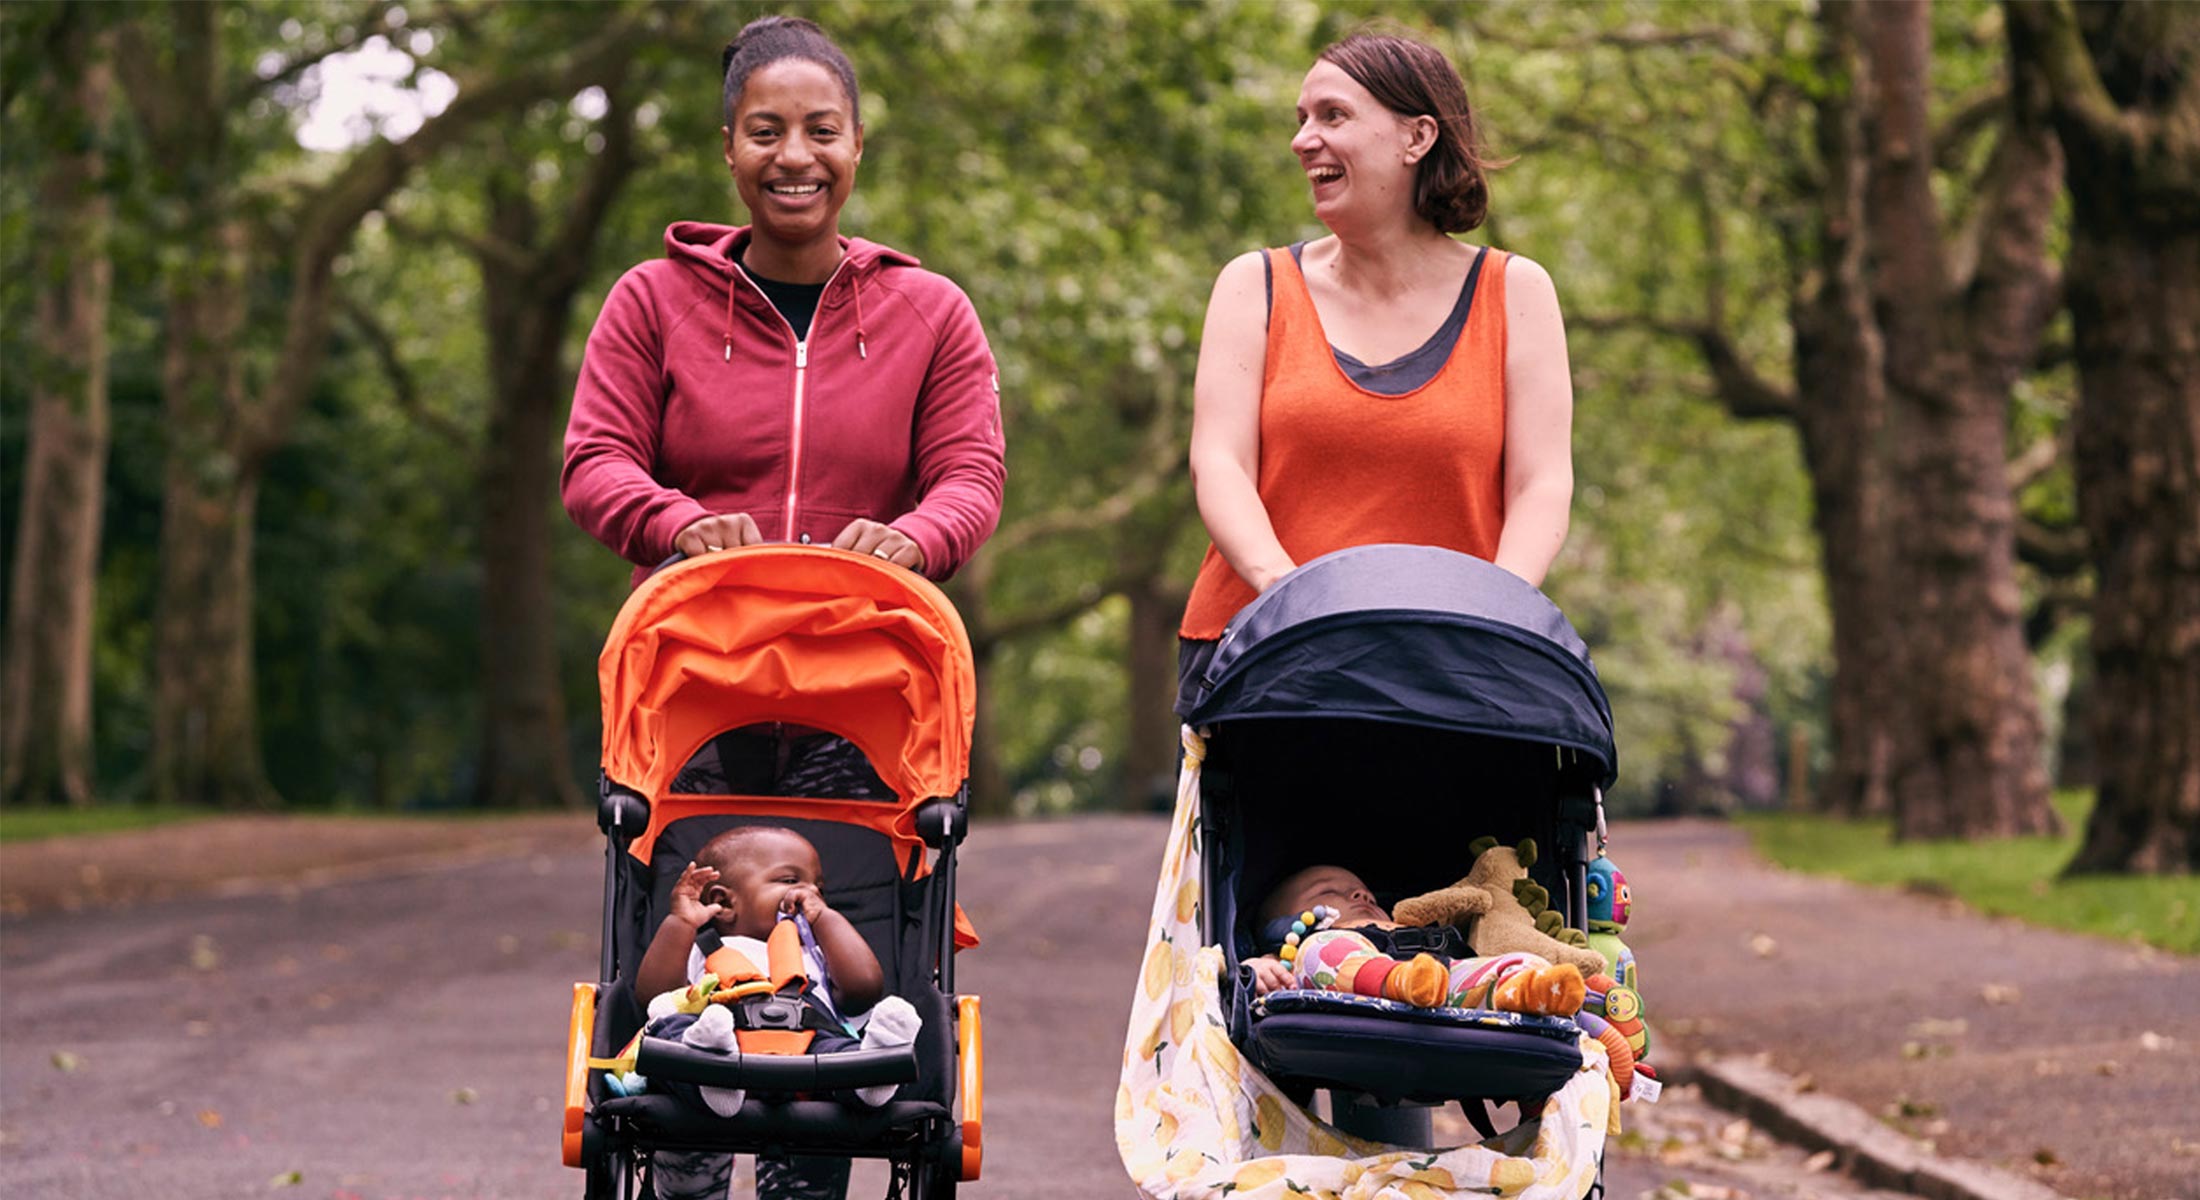 This Mum Moves set to expand after pilot shows improved confidence among healthcare professionals to promote physical activity